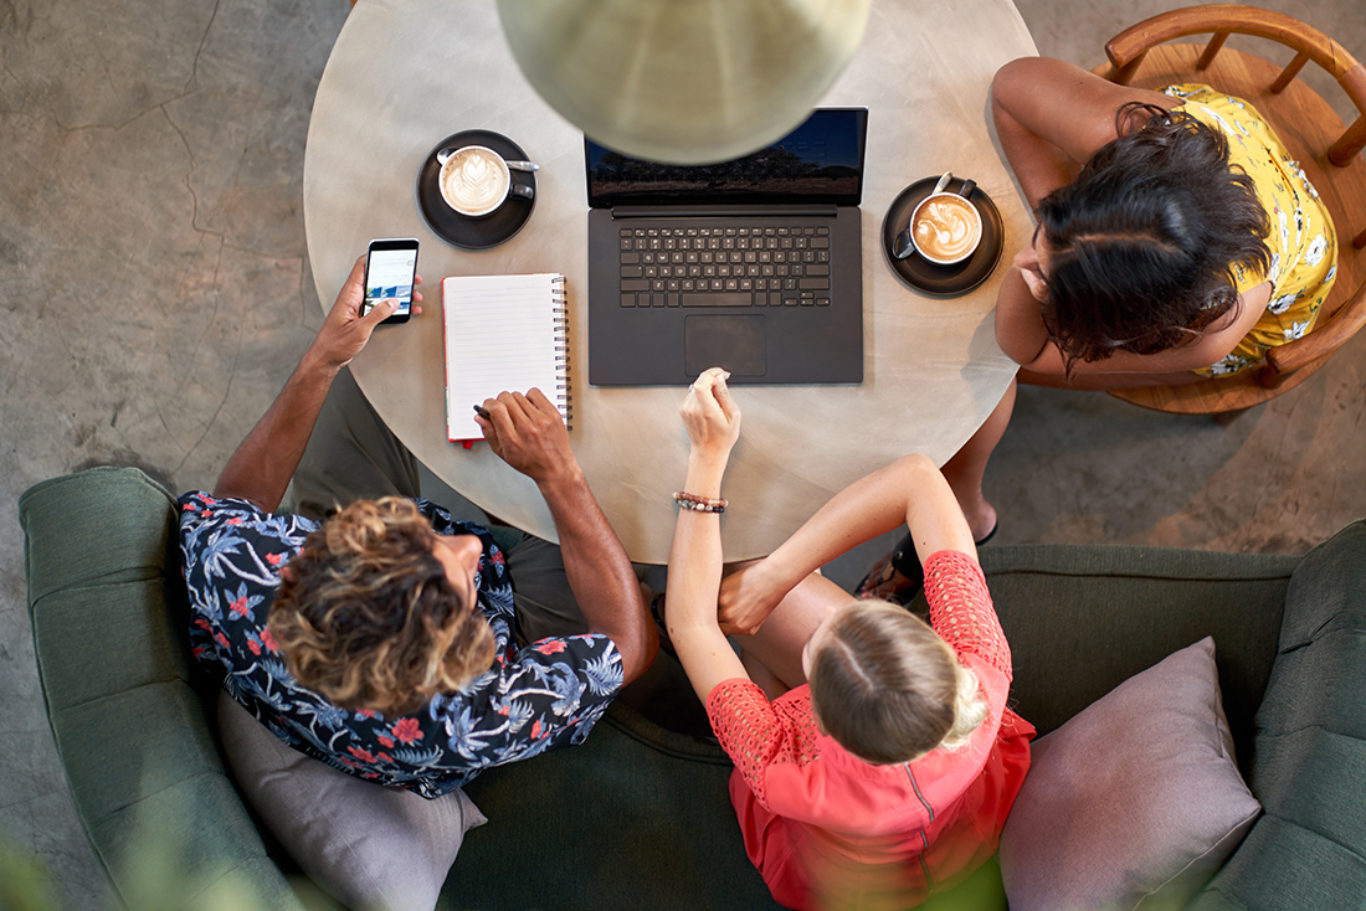 Unposed overhead shot of two mixed race young women and man wearing bright fashionable clothing, working together over fair-trade coffee with a laptop computer at a round table in a trendy hipster cafe and restaurant